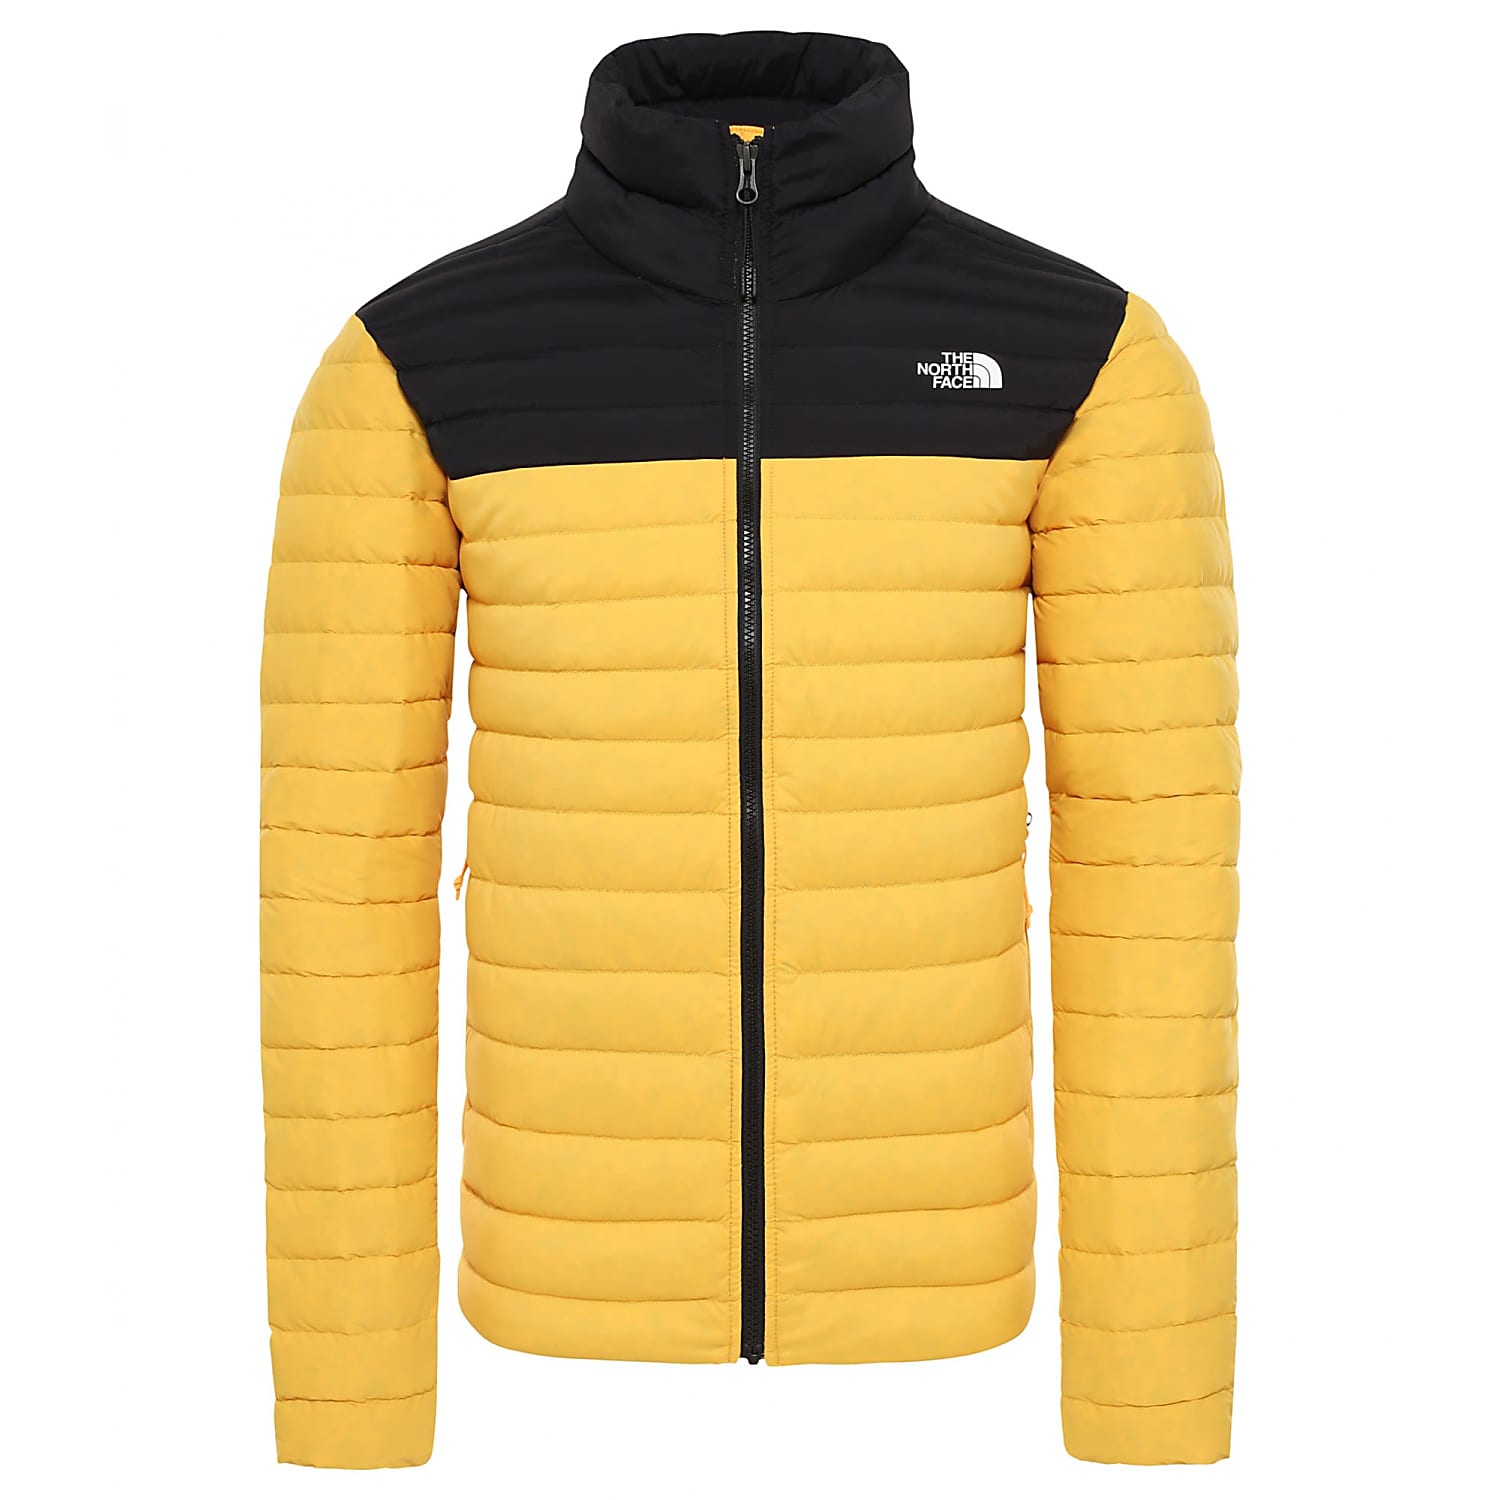 north face yellow and black